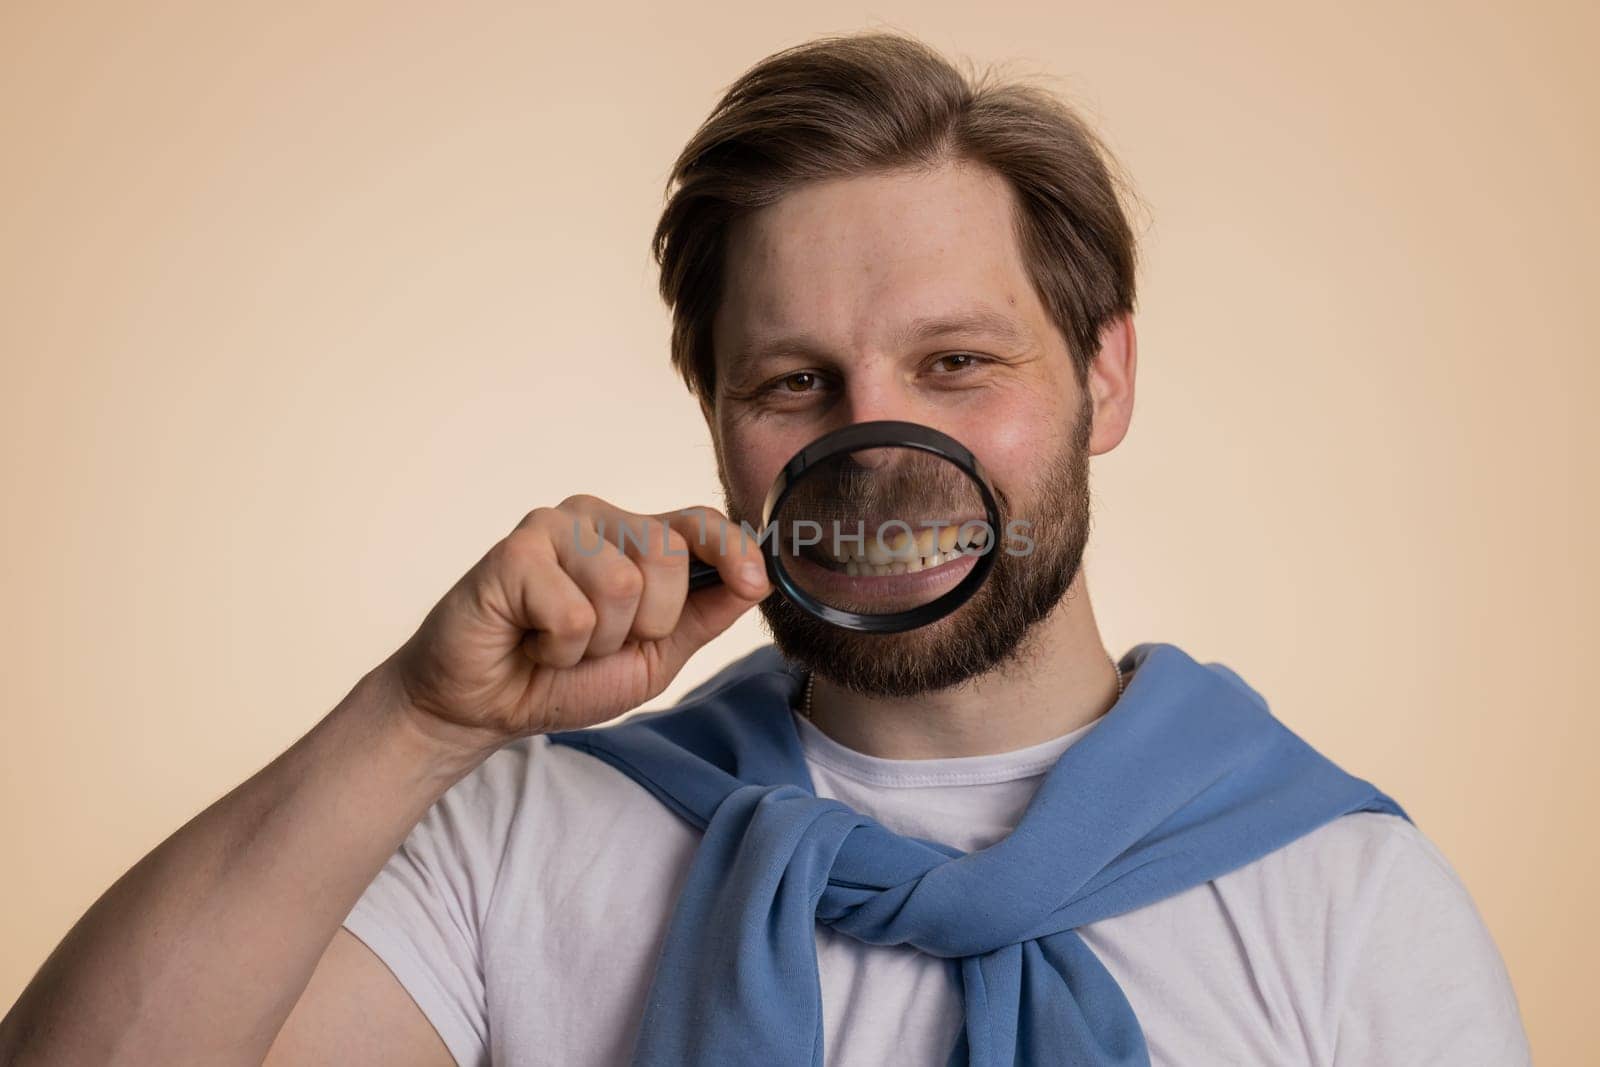 Caucasian man holding magnifier glass on healthy white teeth, looking at camera with happy expression, showing funny silly face smiling mouth. Handsome young guy isolated on beige studio background